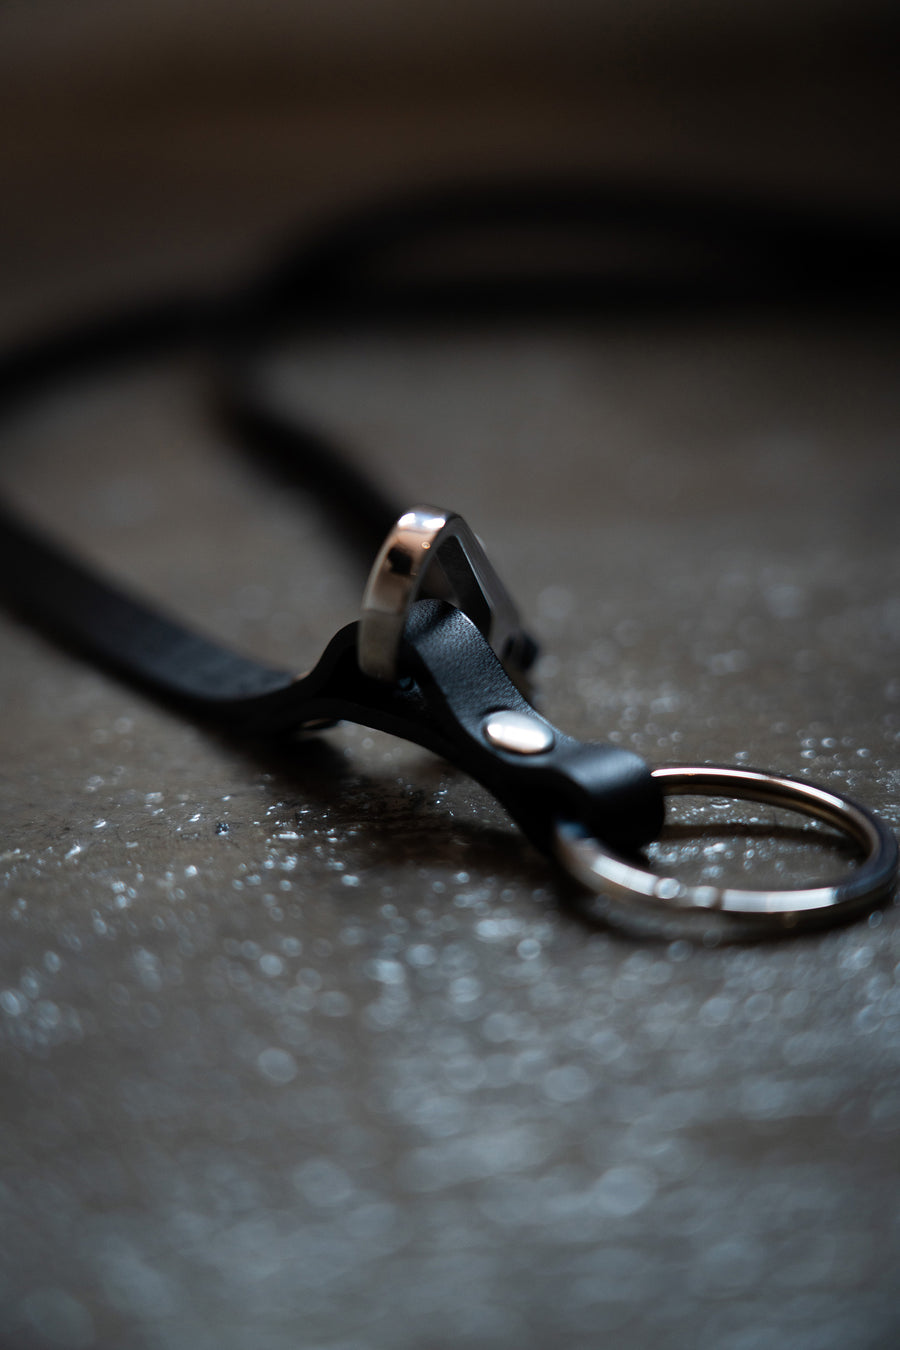 Leather key chain